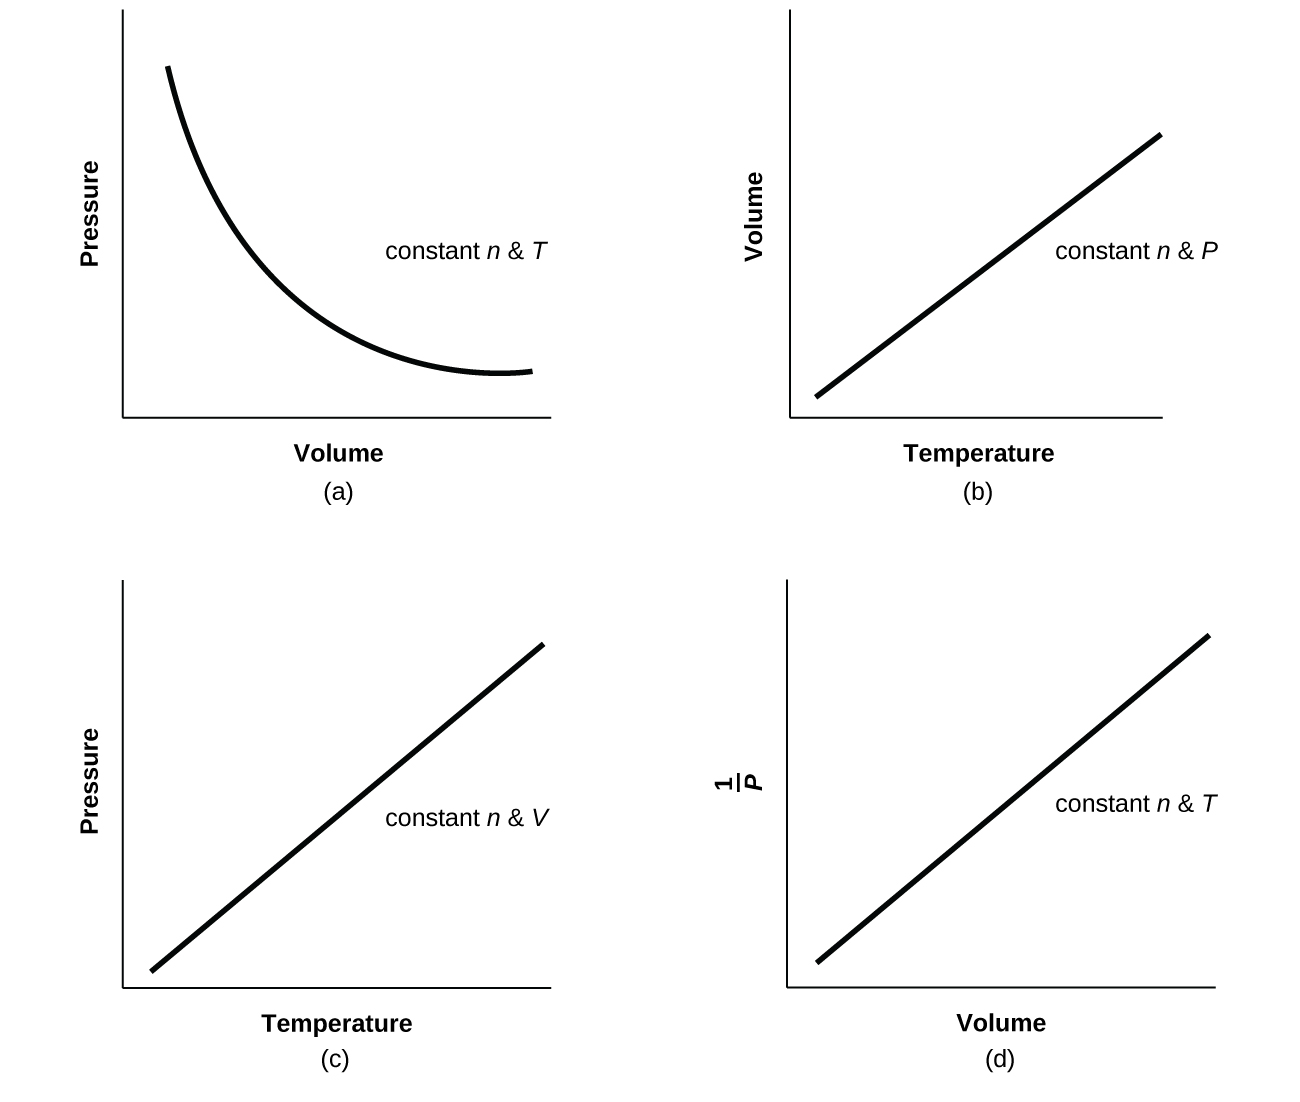 Four graphs are shown. In a, Volume is on the horizontal axis and Pressure is on the vertical axis. A downward trend with a decreasing rate of change is shown by a curved line. The label n, P cons is shown on the graph. In b, Temperature is on the horizontal axis and Volume is on the vertical axis. An increasing linear trend is shown by a straight line segment. The label n, P cons is shown on the graph. In c, Temperature is on the horizontal axis and Pressure is on the vertical axis. An increasing linear trend is shown by a straight line segment. The label n, P cons is shown on the graph. In d, Volume is on the horizontal axis and 1 divided by Pressure is on the vertical axis. An increasing linear trend is shown by a straight line segment on the graph. The label n, P cons is shown on the graph.